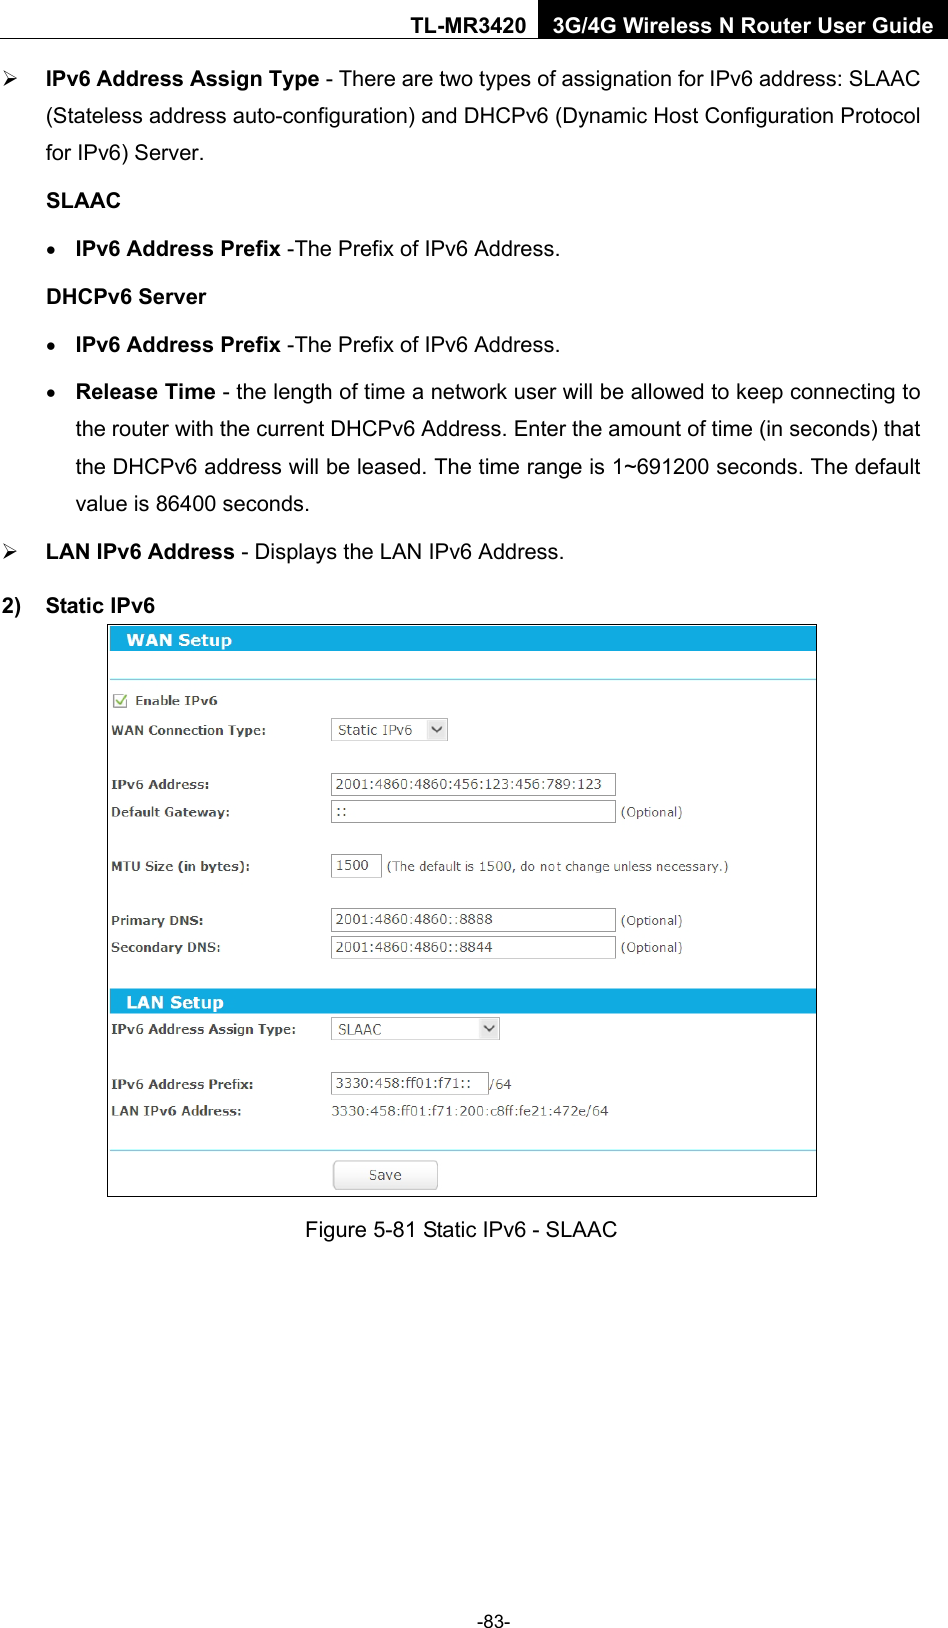    -83- TL-MR3420 3G/4G Wireless N Router User Guide  IPv6 Address Assign Type - There are two types of assignation for IPv6 address: SLAAC (Stateless address auto-configuration) and DHCPv6 (Dynamic Host Configuration Protocol for IPv6) Server. SLAAC • IPv6 Address Prefix -The Prefix of IPv6 Address. DHCPv6 Server • IPv6 Address Prefix -The Prefix of IPv6 Address. • Release Time - the length of time a network user will be allowed to keep connecting to the router with the current DHCPv6 Address. Enter the amount of time (in seconds) that the DHCPv6 address will be leased. The time range is 1~691200 seconds. The default value is 86400 seconds.  LAN IPv6 Address - Displays the LAN IPv6 Address. 2) Static IPv6  Figure 5-81 Static IPv6 - SLAAC 